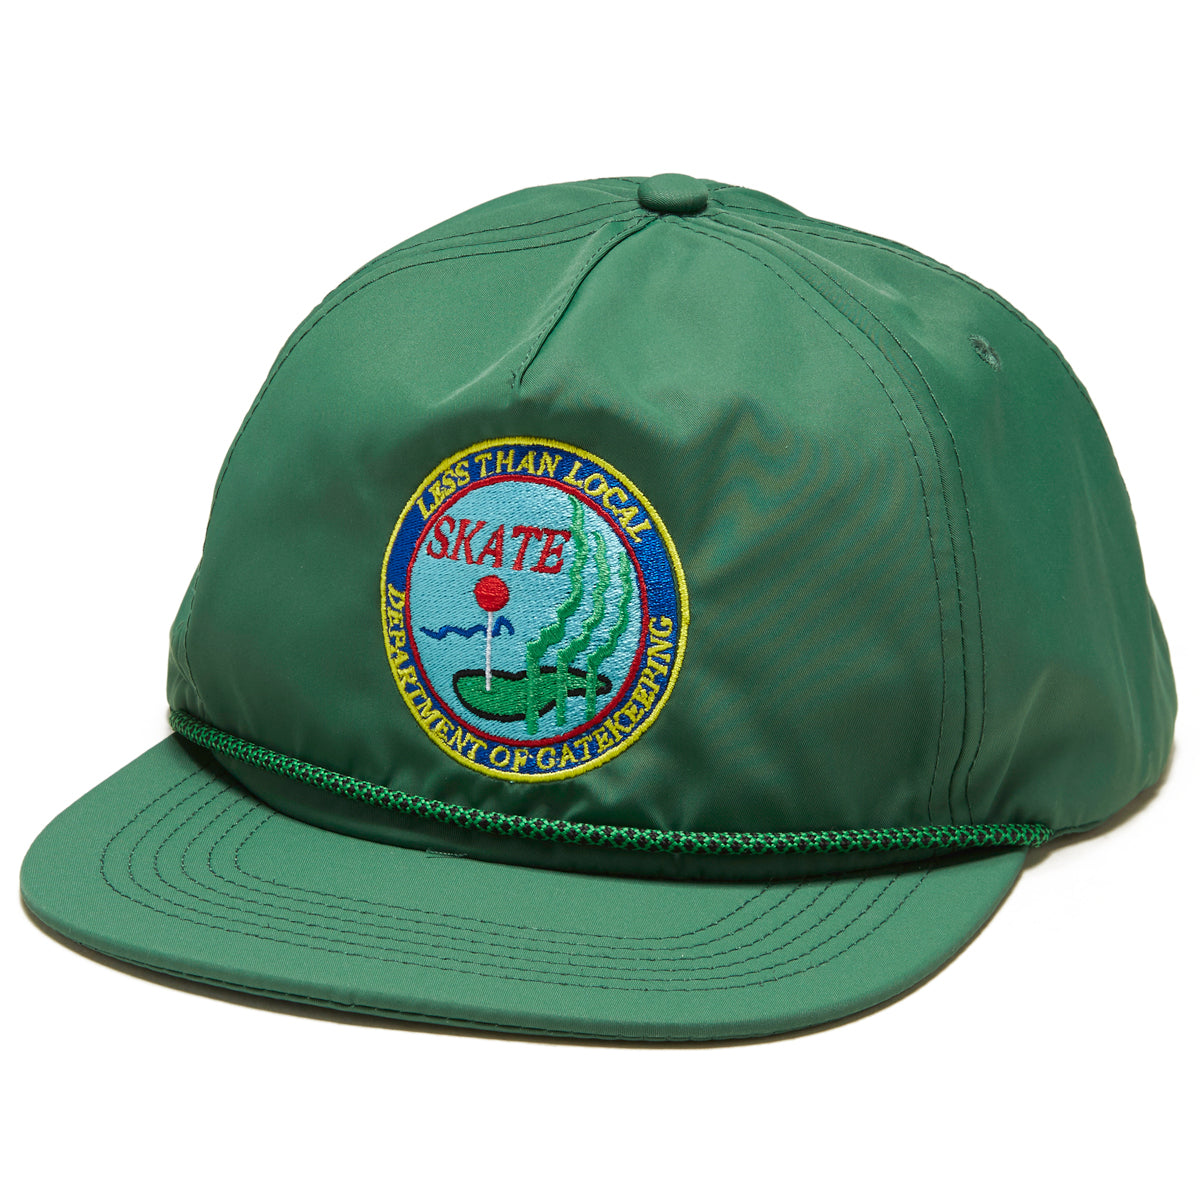 Less Than Local GateKeepers Rope Hat - Green image 1